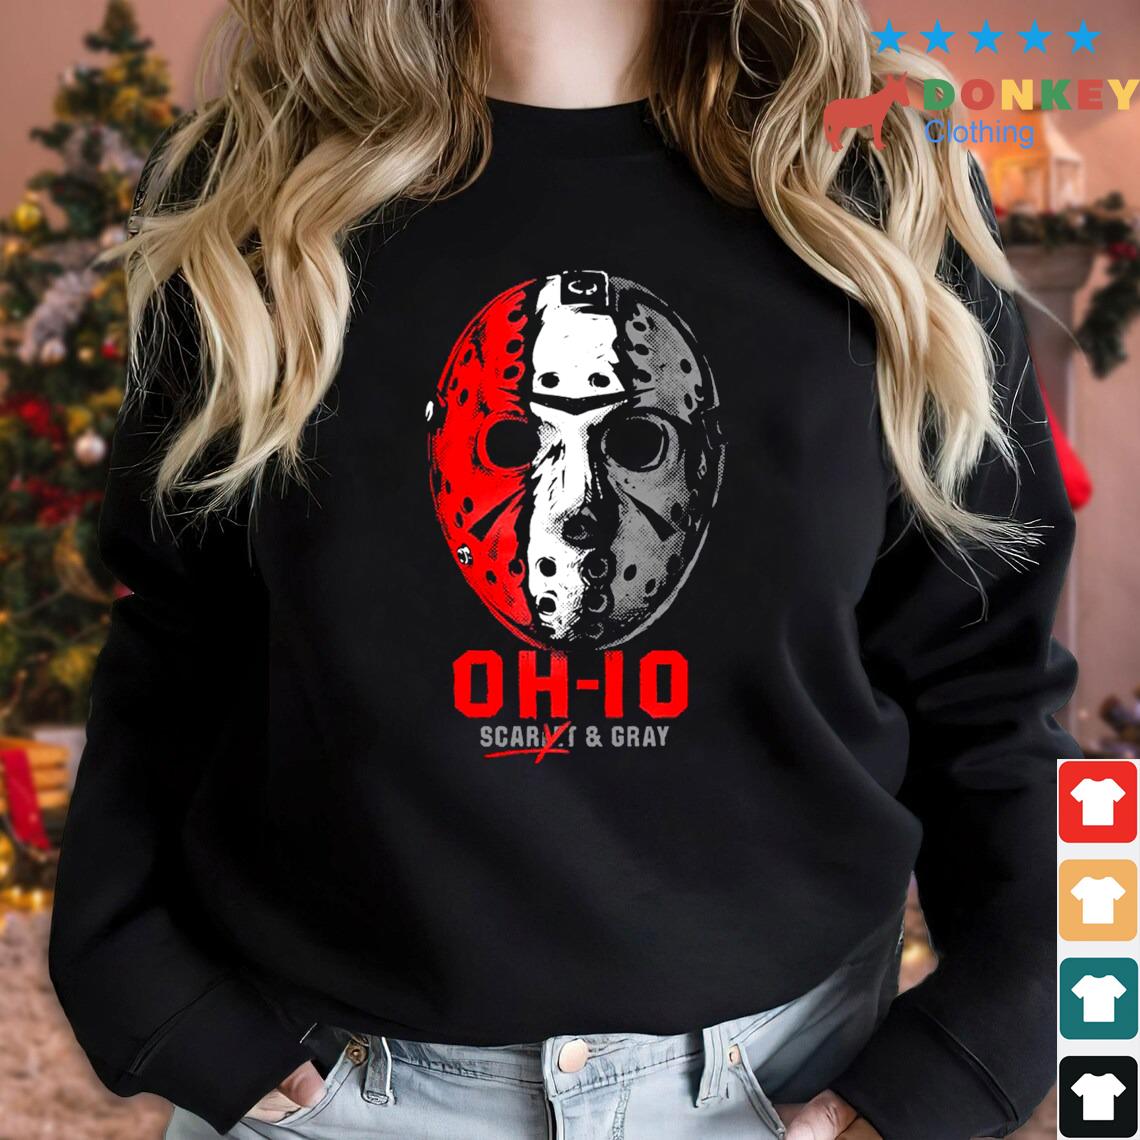 OH-IO Scary And Grey Mask Shirt